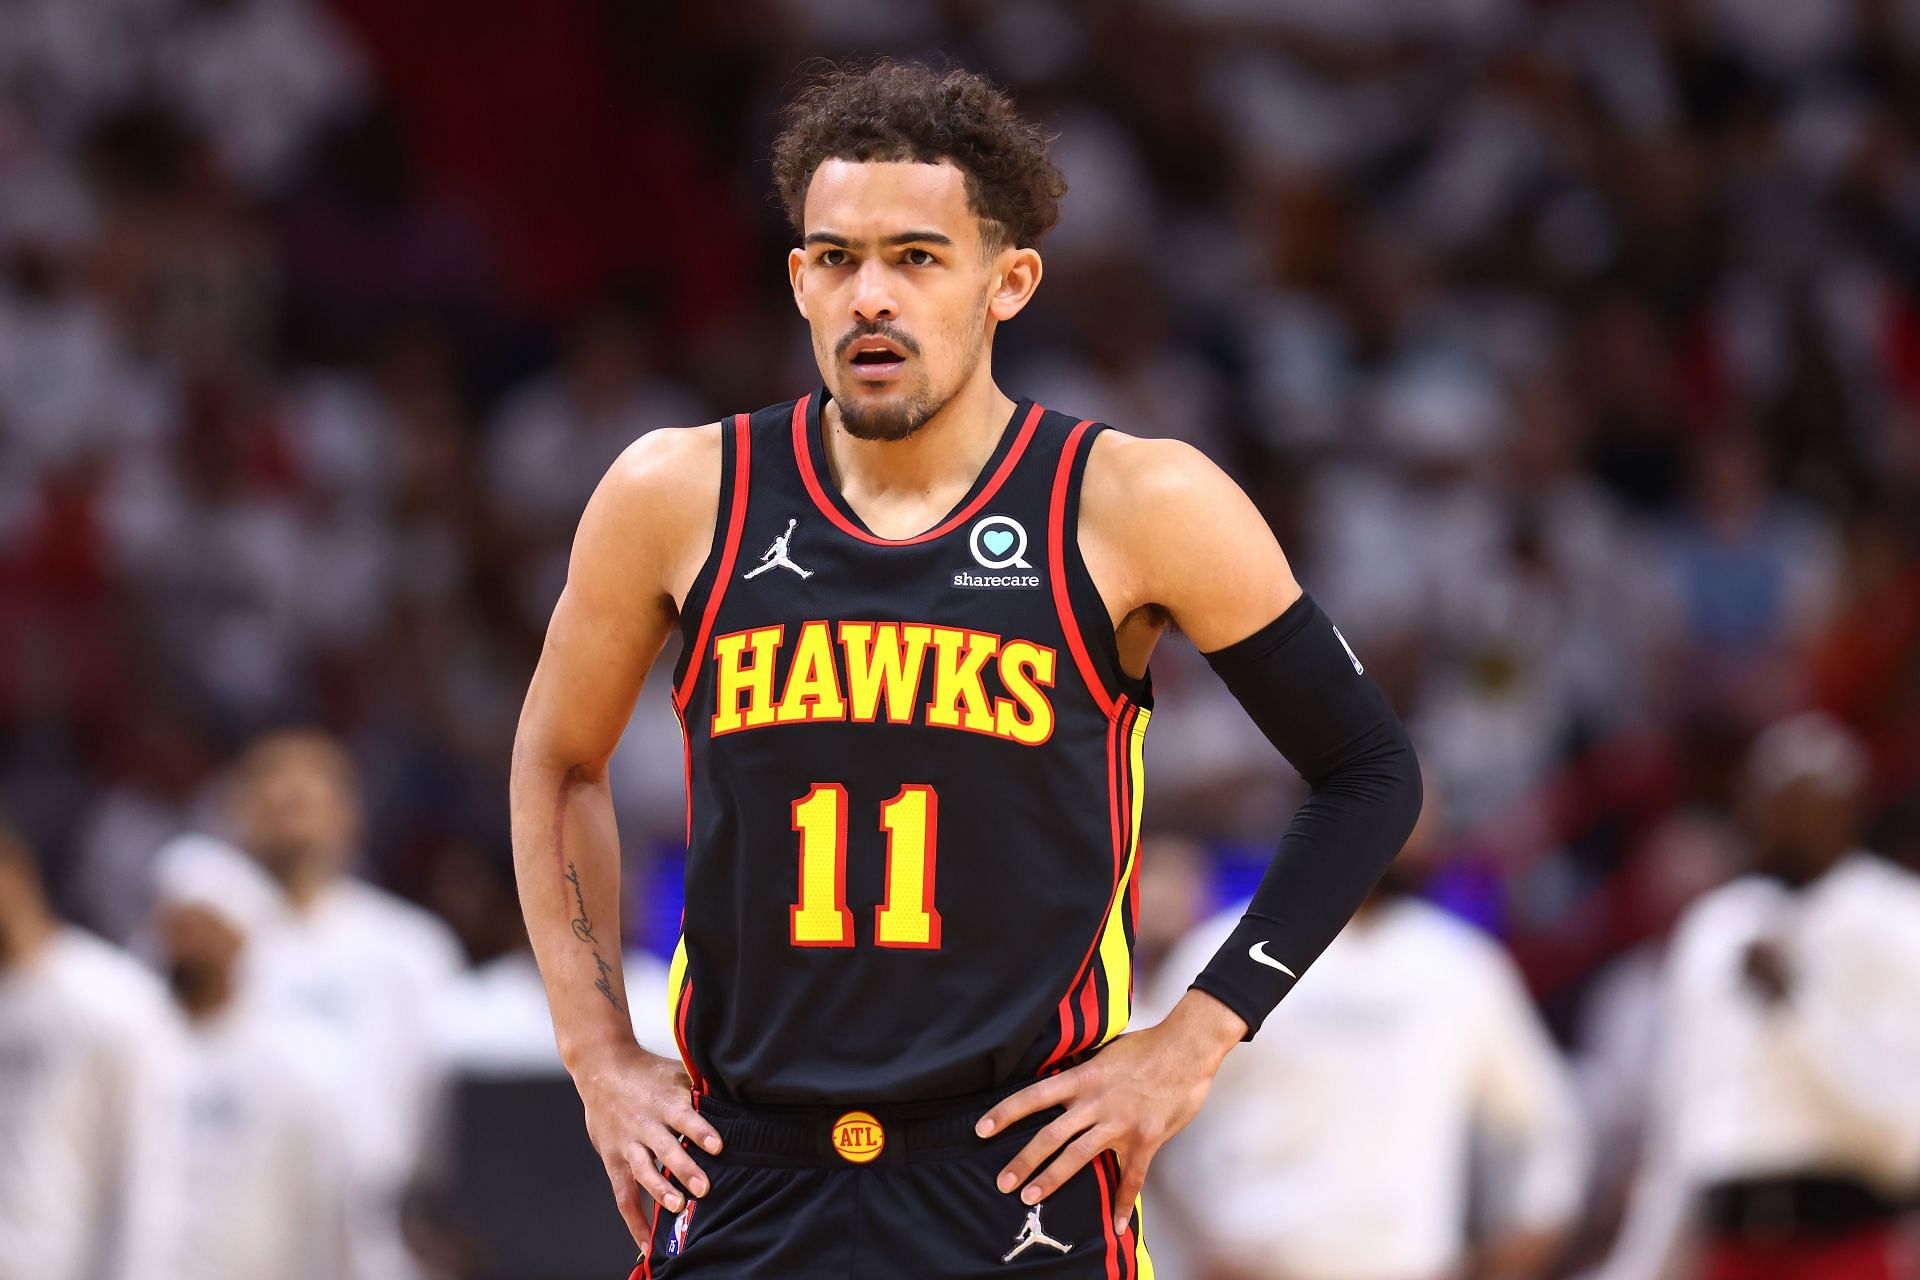 Trae Young has mastered the art of the short stop, yet another